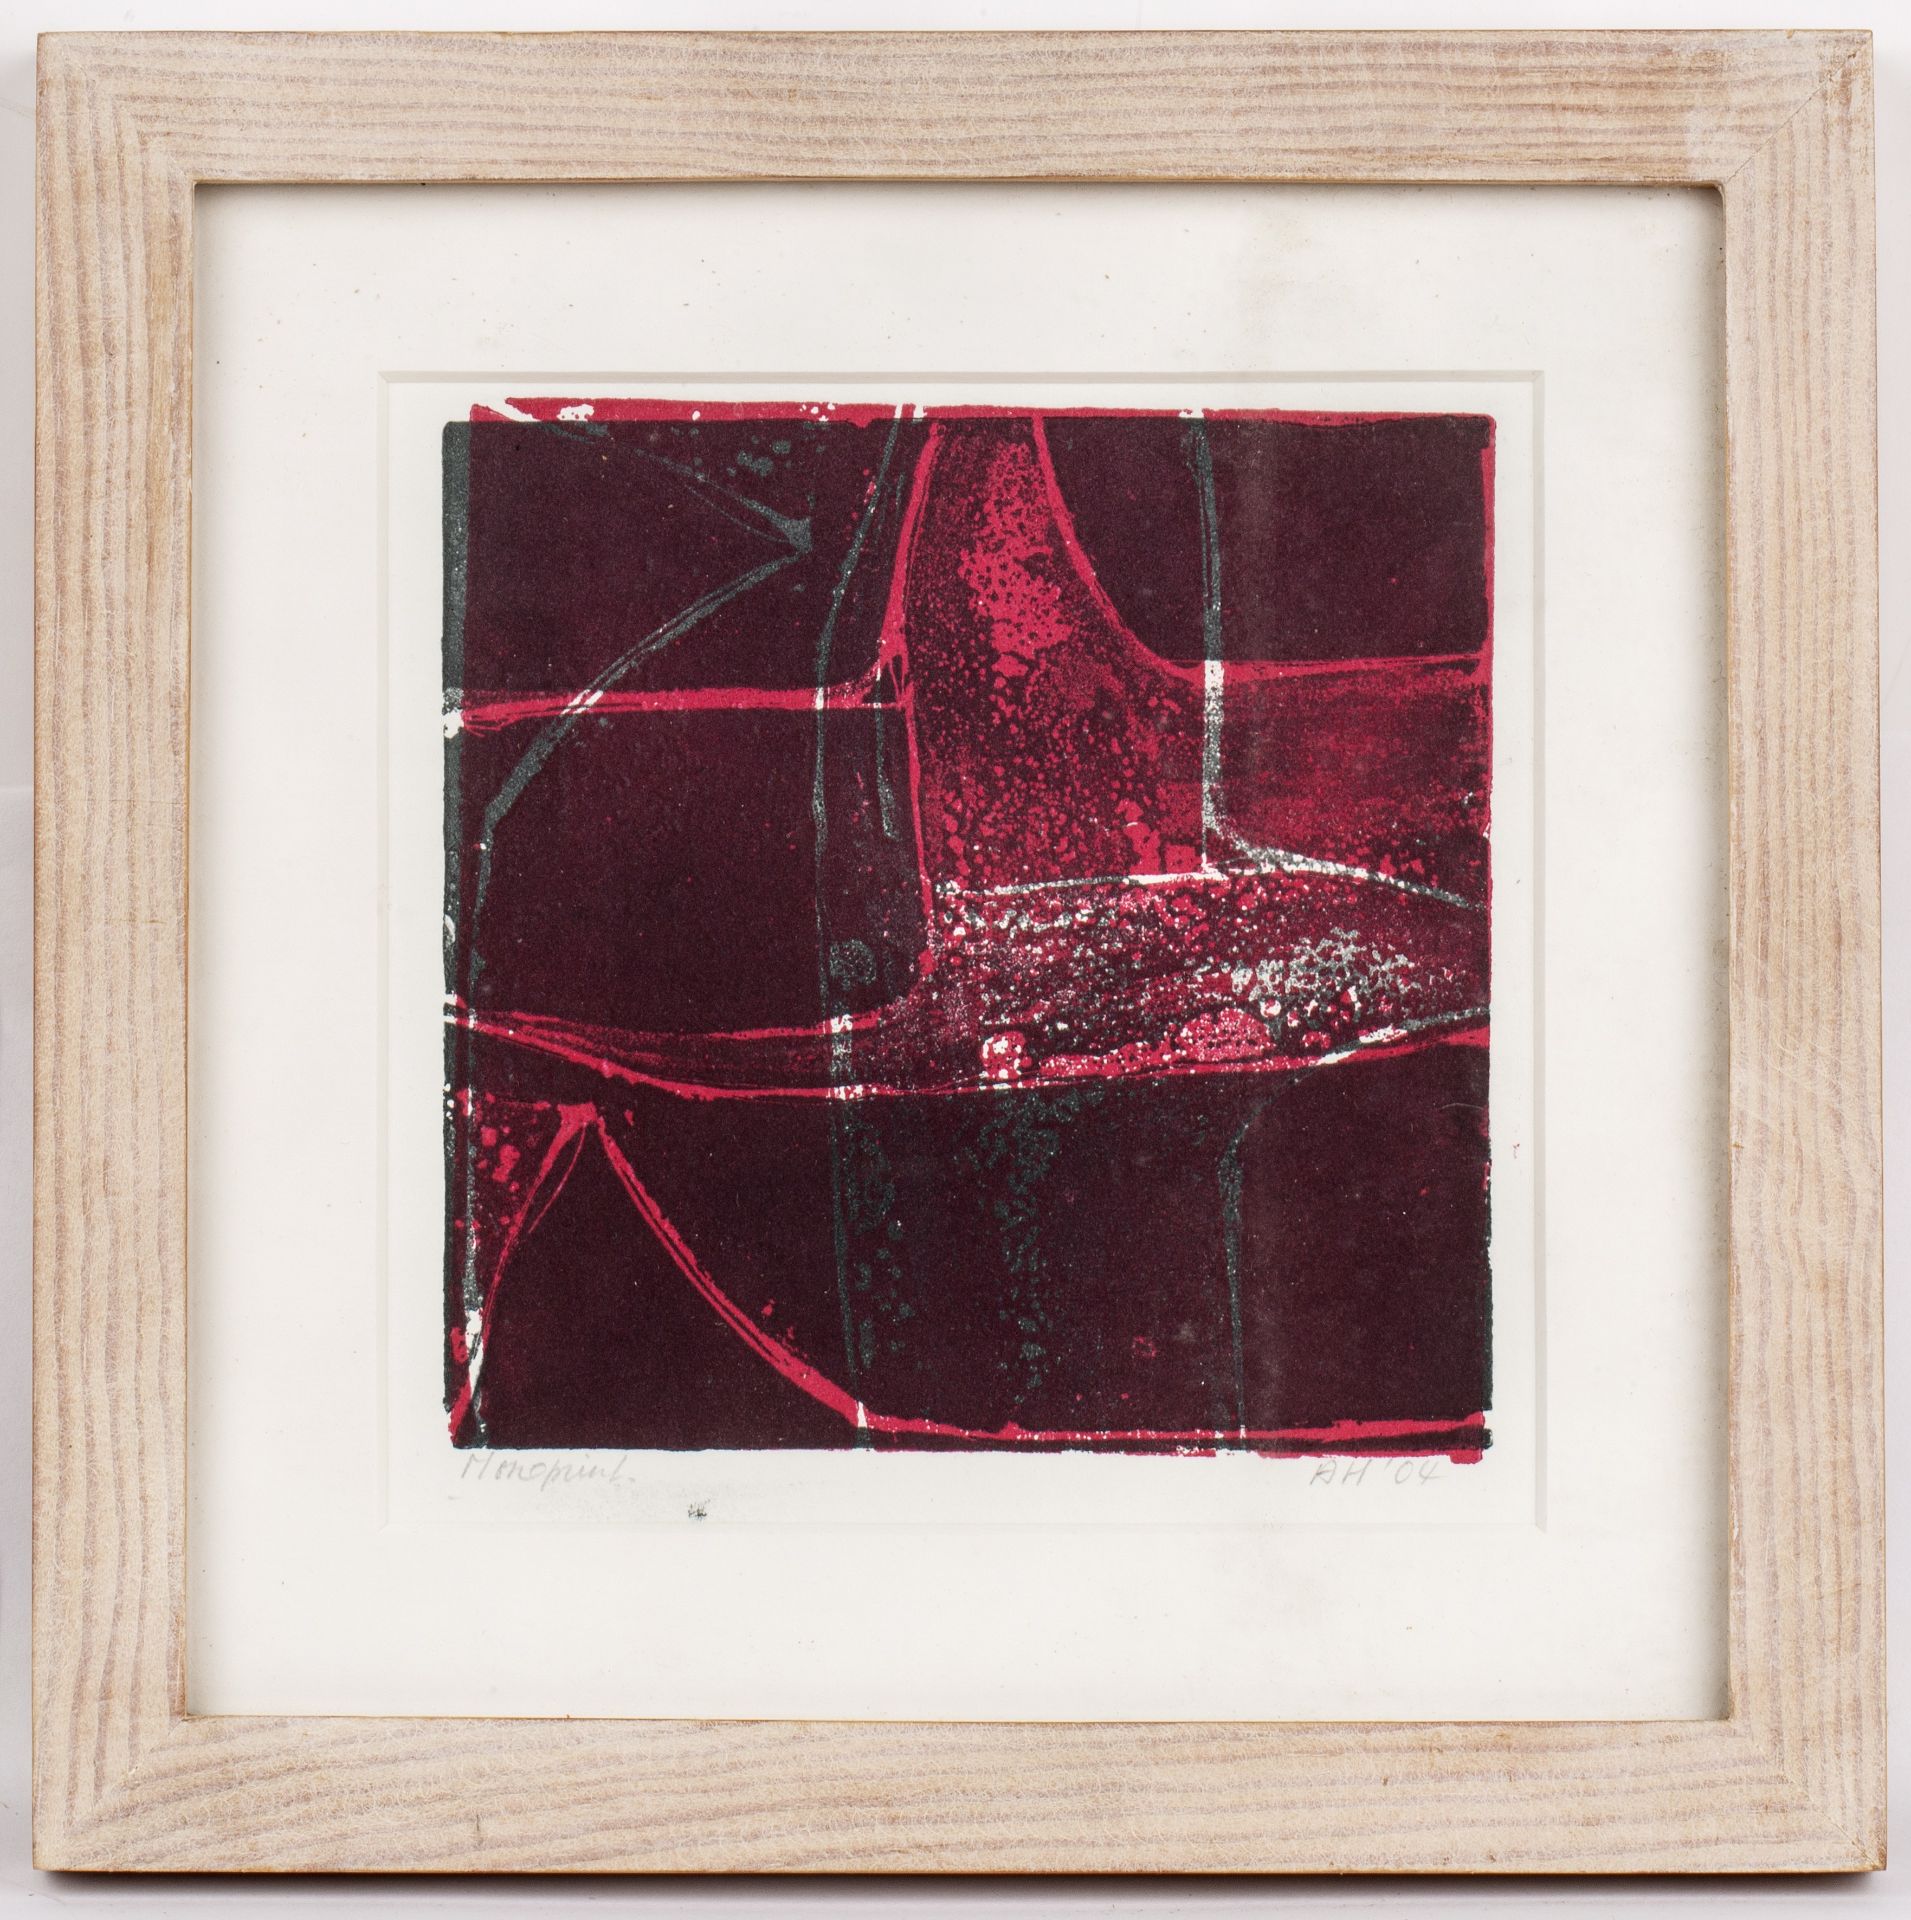 Annette H**** (Contemporary) 'Red abstract', monoprint, signed and dated 2004 in pencil lower right, - Image 2 of 6